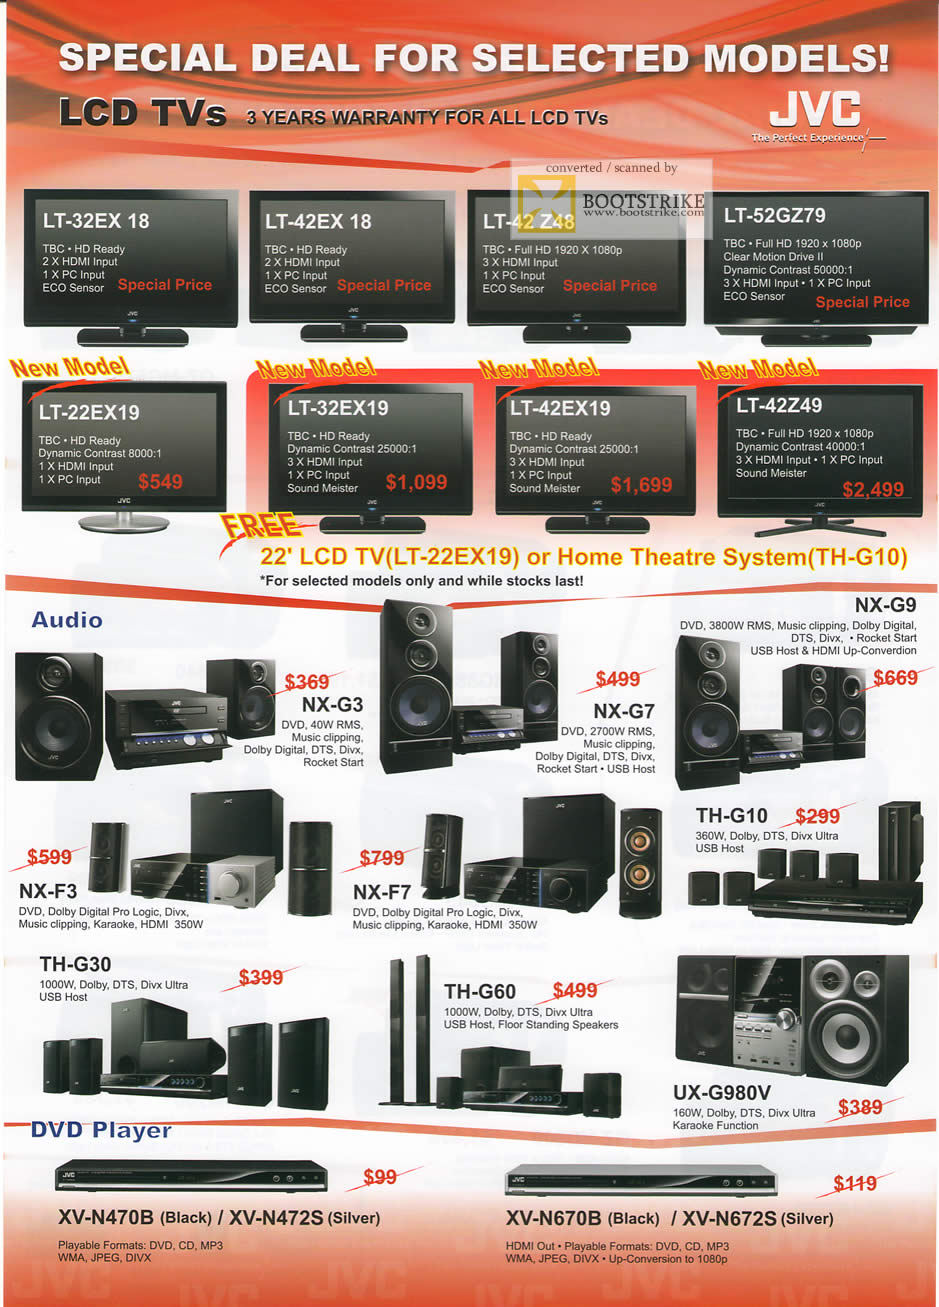 PC Show 2009 price list image brochure of JVC LCD TV Audio DVD Player Home Theatre